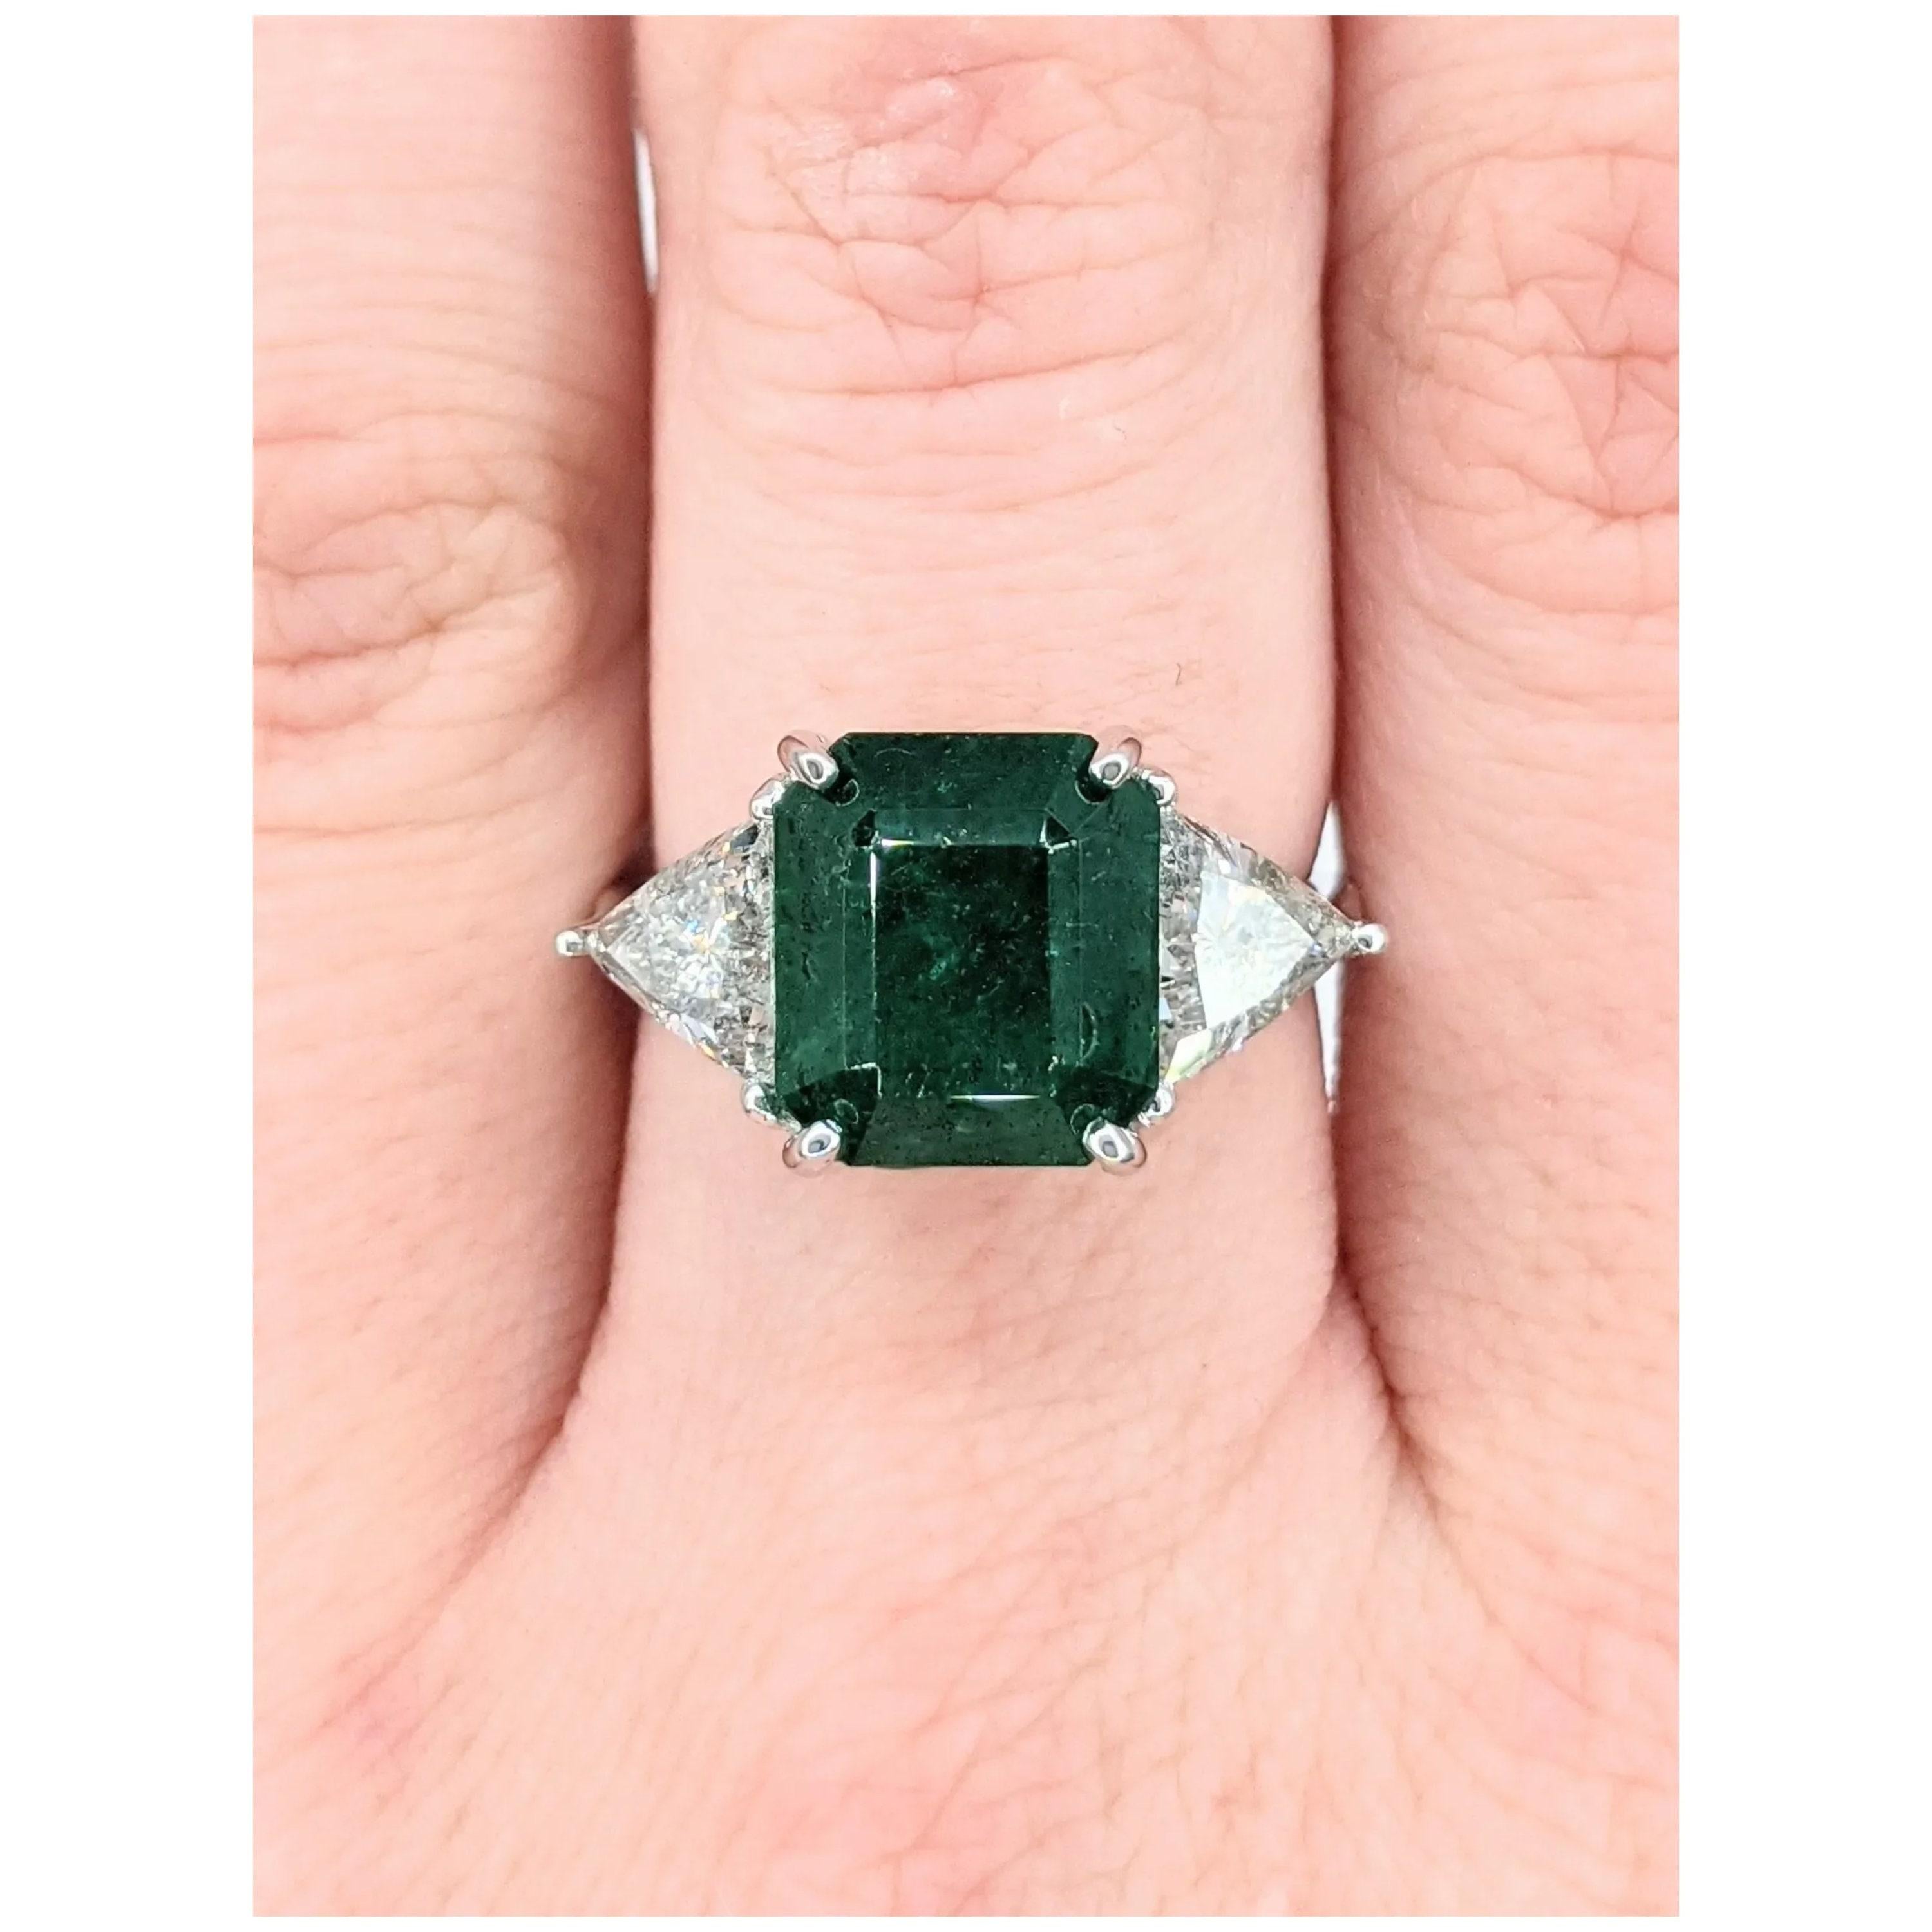 For Sale:  18K Gold 3 CT Natural Emerald and Diamond Antique Art Deco Style Engagement Ring 5